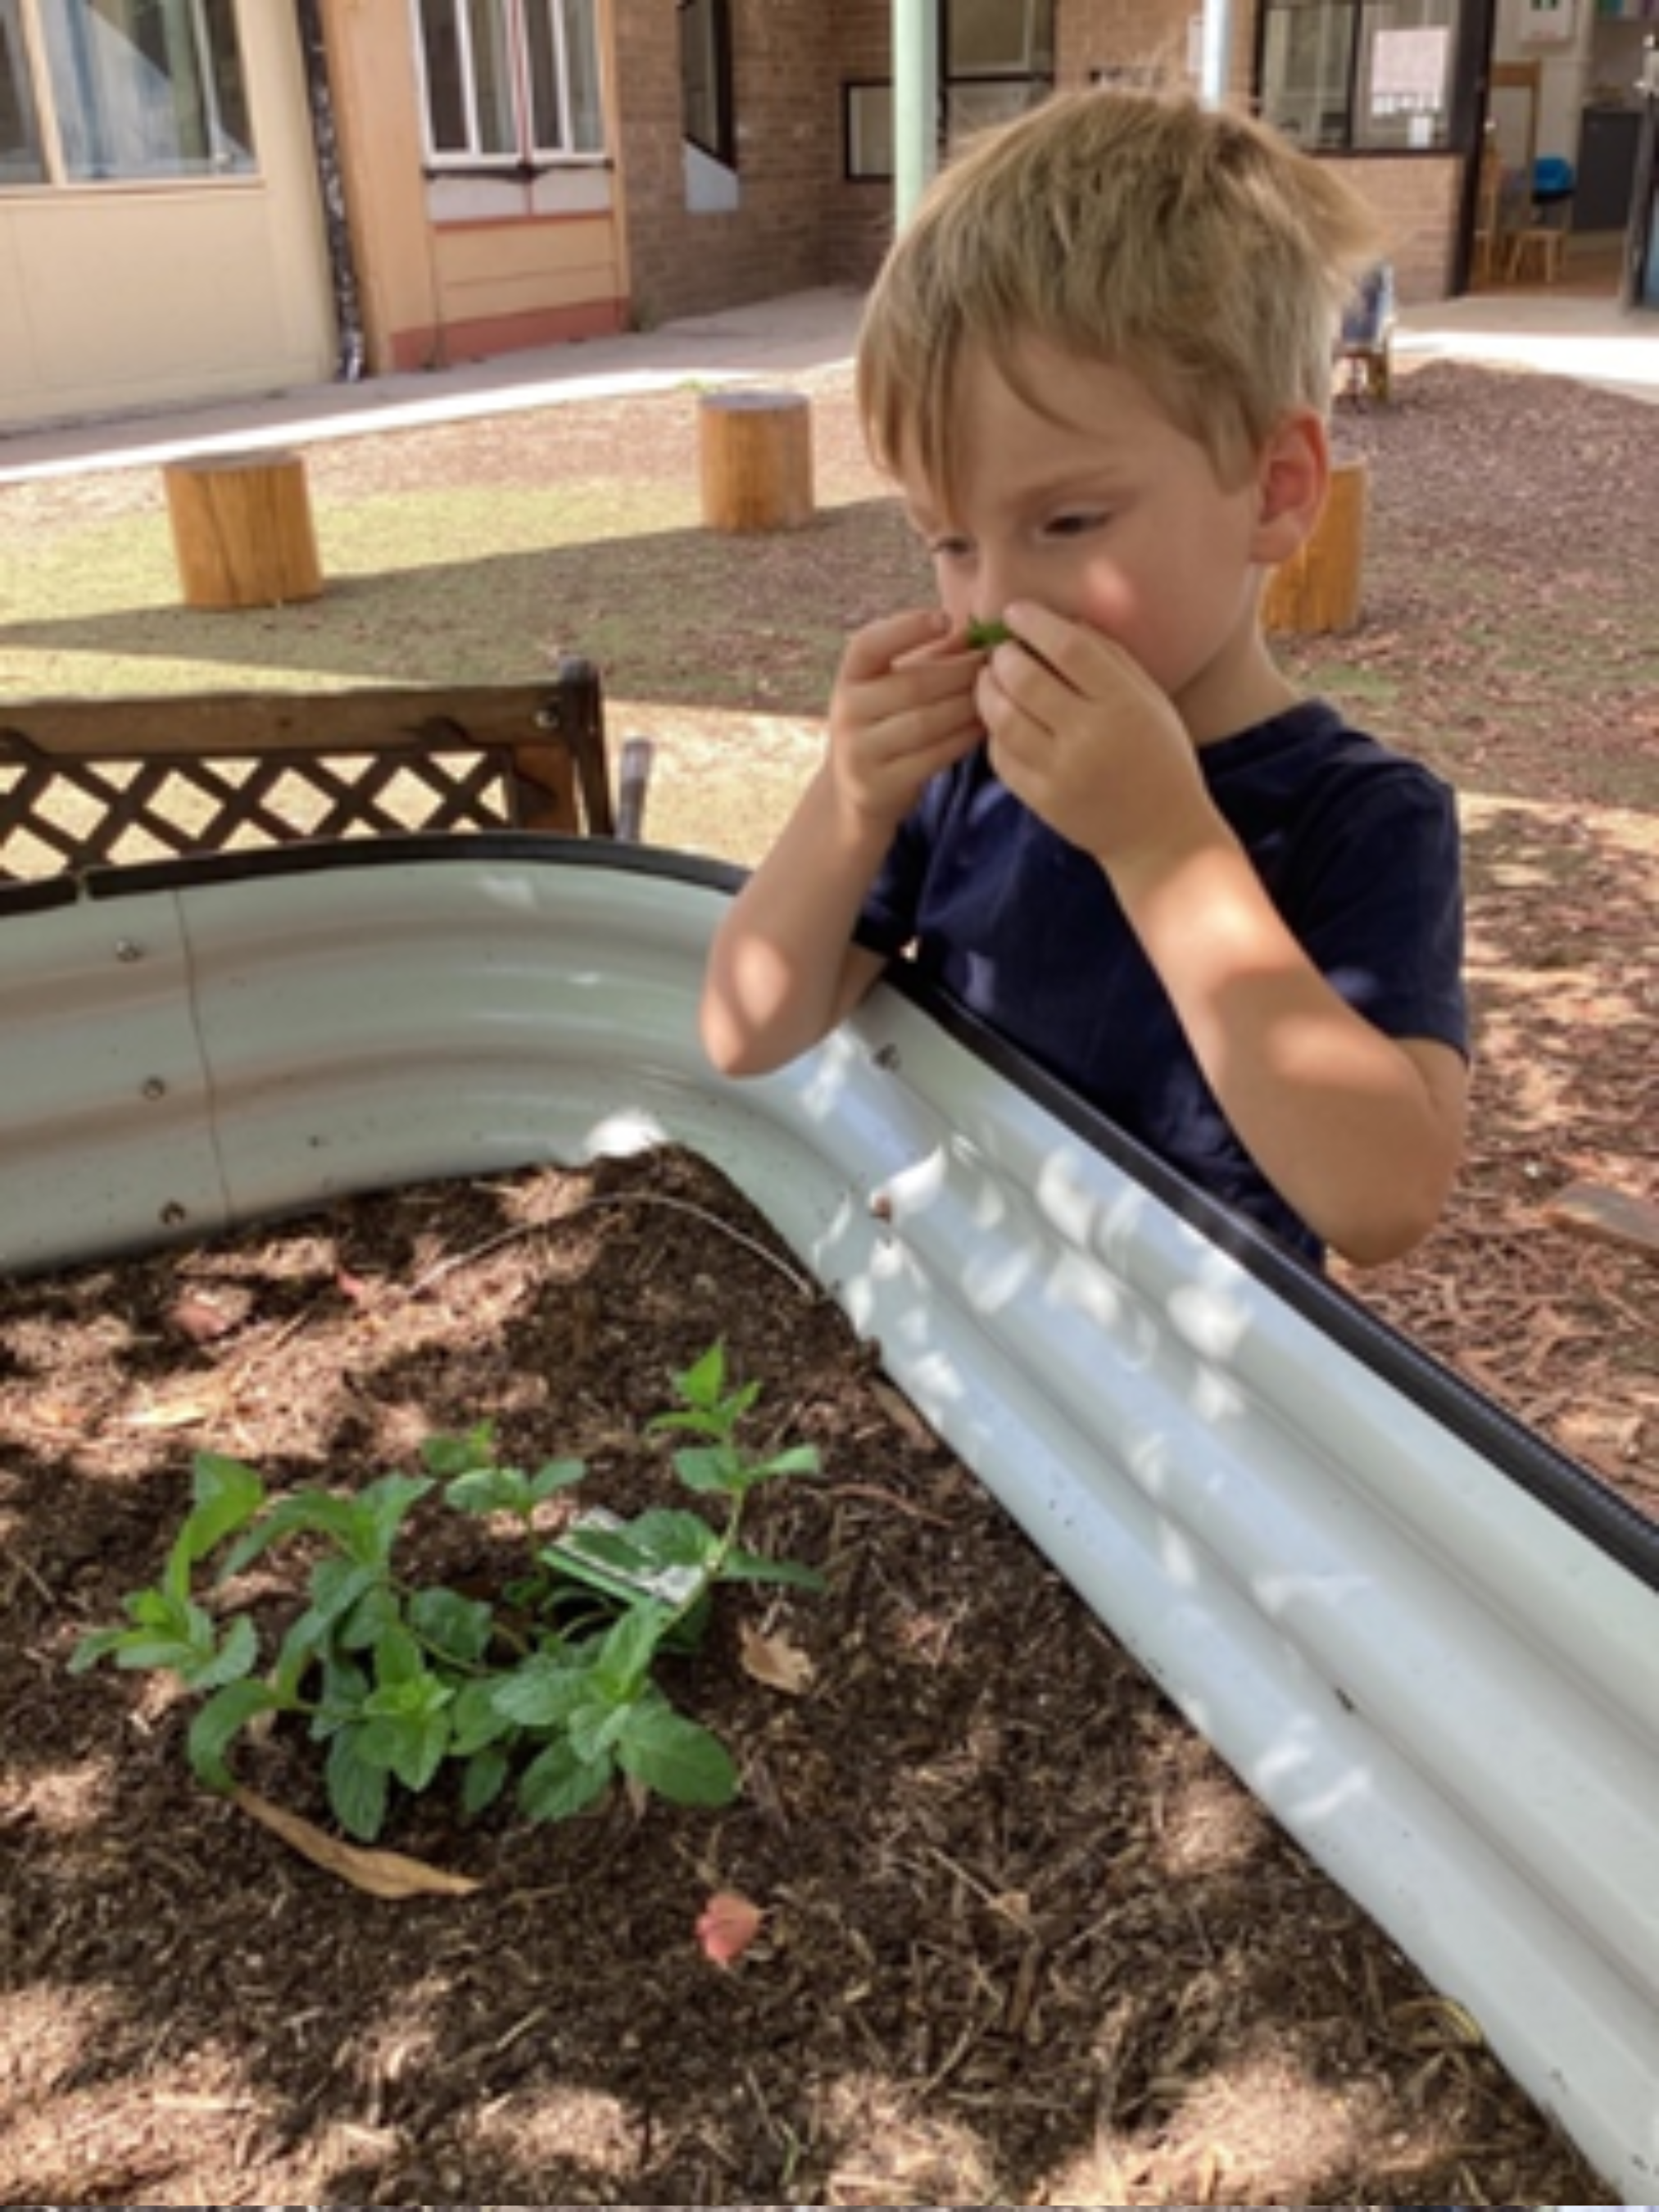 A little boy smelling the mint scent from the plant he just planted in the garden bed.